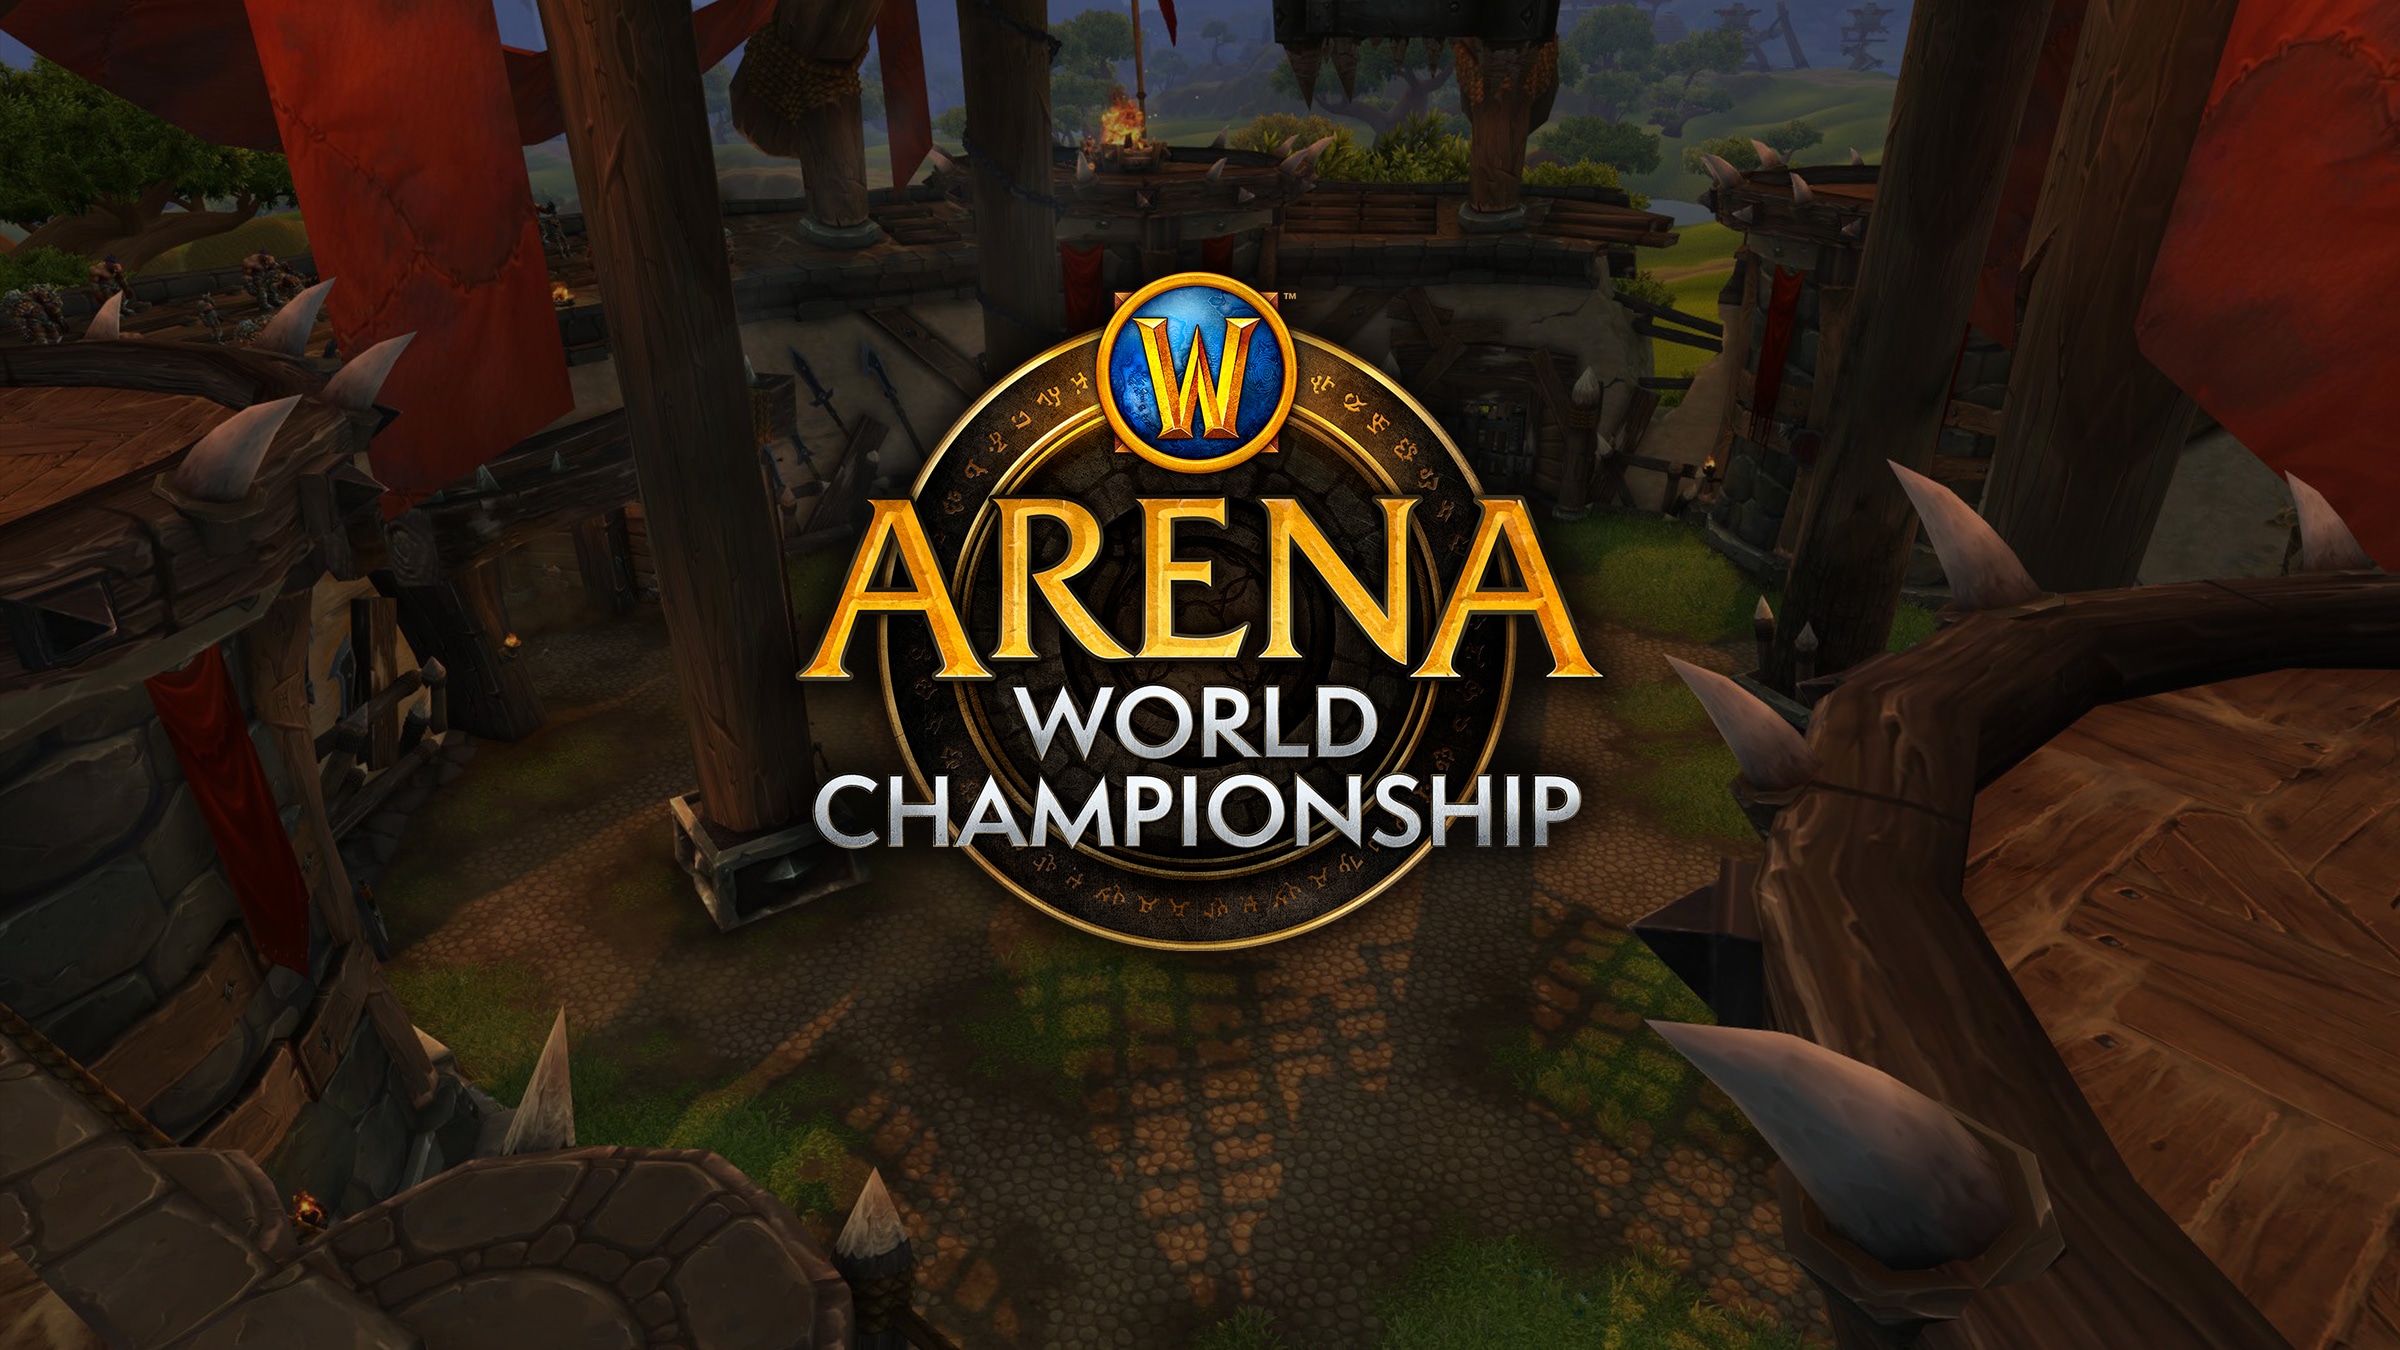 Tune in May 26-27 for the WoW Arena Championship: European Qualifier Cup 2